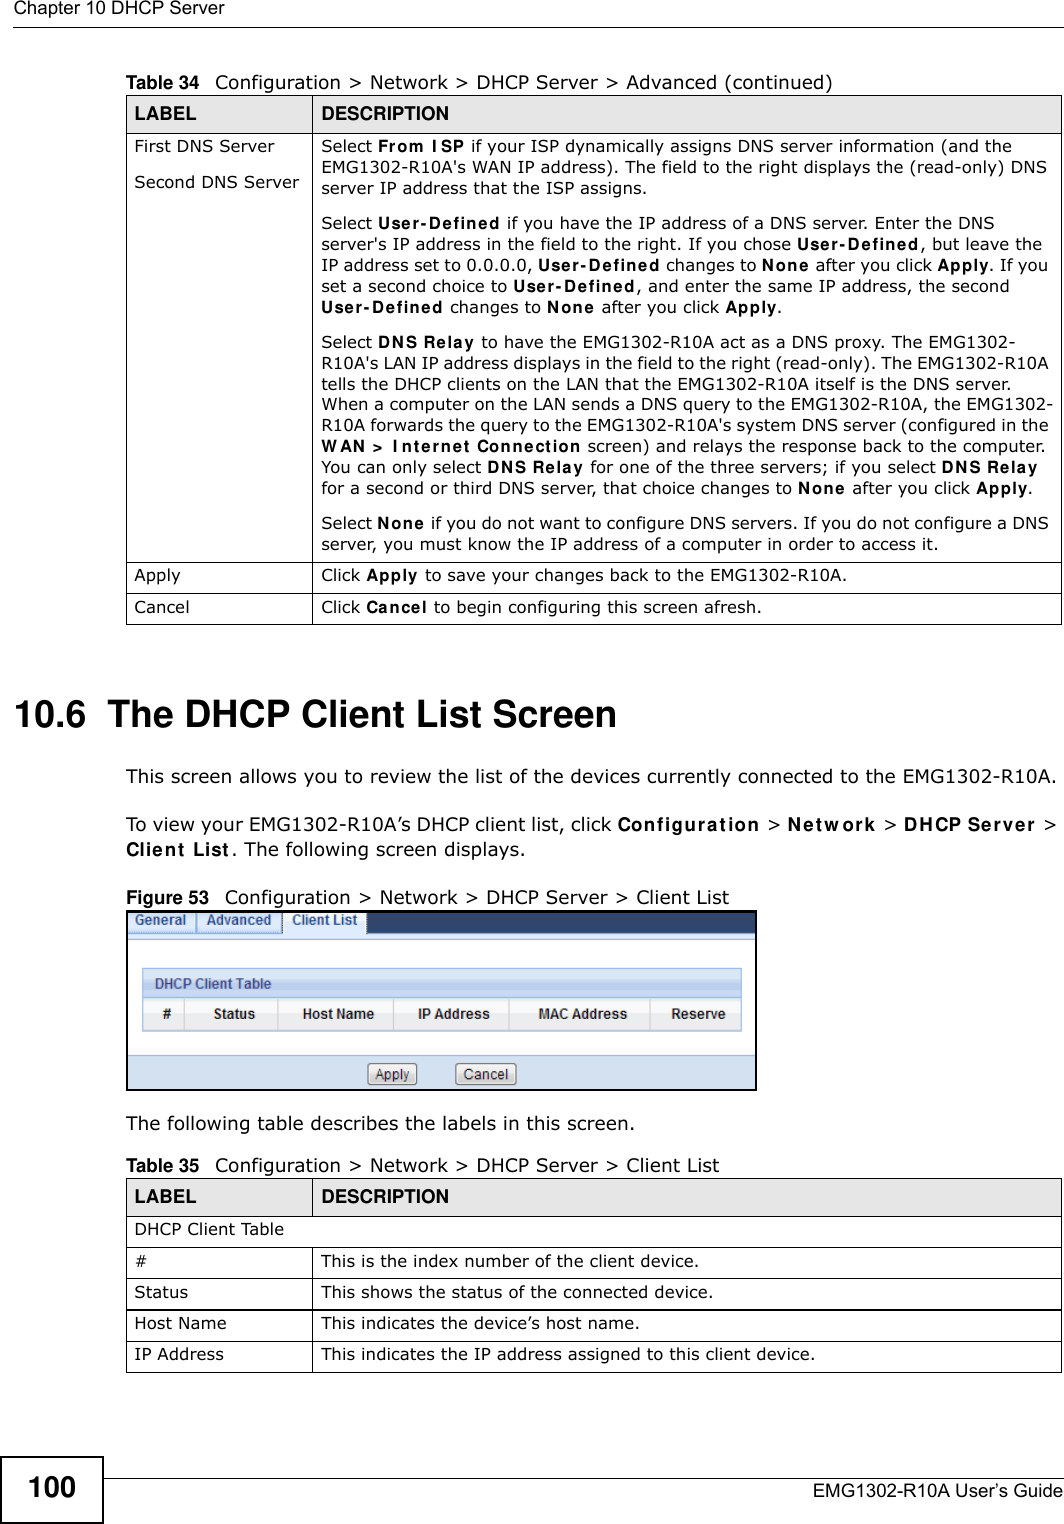 Chapter 10 DHCP ServerEMG1302-R10A User’s Guide10010.6  The DHCP Client List ScreenThis screen allows you to review the list of the devices currently connected to the EMG1302-R10A.To view your EMG1302-R10A’s DHCP client list, click Co nfigu r at ion &gt; Net w ork &gt; DHCP Se r ver &gt; Client List . The following screen displays.Figure 53   Configuration &gt; Network &gt; DHCP Server &gt; Client List The following table describes the labels in this screen.First DNS ServerSecond DNS ServerSelect From  I SP if your ISP dynamically assigns DNS server information (and the EMG1302-R10A&apos;s WAN IP address). The field to the right displays the (read-only) DNS server IP address that the ISP assigns.Select Use r- D efine d if you have the IP address of a DNS server. Enter the DNS server&apos;s IP address in the field to the right. If you chose Use r- Defin ed , but leave the IP address set to 0.0.0.0, Use r- Define d changes to N o ne  after you click Apply. If you set a second choice to Use r- De fin ed, and enter the same IP address, the second Use r- D efined  changes to N on e after you click Apply. Select DNS Relay to have the EMG1302-R10A act as a DNS proxy. The EMG1302-R10A&apos;s LAN IP address displays in the field to the right (read-only). The EMG1302-R10A tells the DHCP clients on the LAN that the EMG1302-R10A itself is the DNS server. When a computer on the LAN sends a DNS query to the EMG1302-R10A, the EMG1302-R10A forwards the query to the EMG1302-R10A&apos;s system DNS server (configured in the W AN &gt;  I nterne t  Conn e ction screen) and relays the response back to the computer. You can only select DNS Rela y for one of the three servers; if you select DNS Relay for a second or third DNS server, that choice changes to N on e  after you click Apply. Select N o ne  if you do not want to configure DNS servers. If you do not configure a DNS server, you must know the IP address of a computer in order to access it.Apply Click Apply  to save your changes back to the EMG1302-R10A.Cancel Click Cancel to begin configuring this screen afresh.Table 34   Configuration &gt; Network &gt; DHCP Server &gt; Advanced (continued)LABEL DESCRIPTIONTable 35   Configuration &gt; Network &gt; DHCP Server &gt; Client ListLABEL DESCRIPTIONDHCP Client Table# This is the index number of the client device.Status This shows the status of the connected device.Host Name This indicates the device’s host name.IP Address This indicates the IP address assigned to this client device.